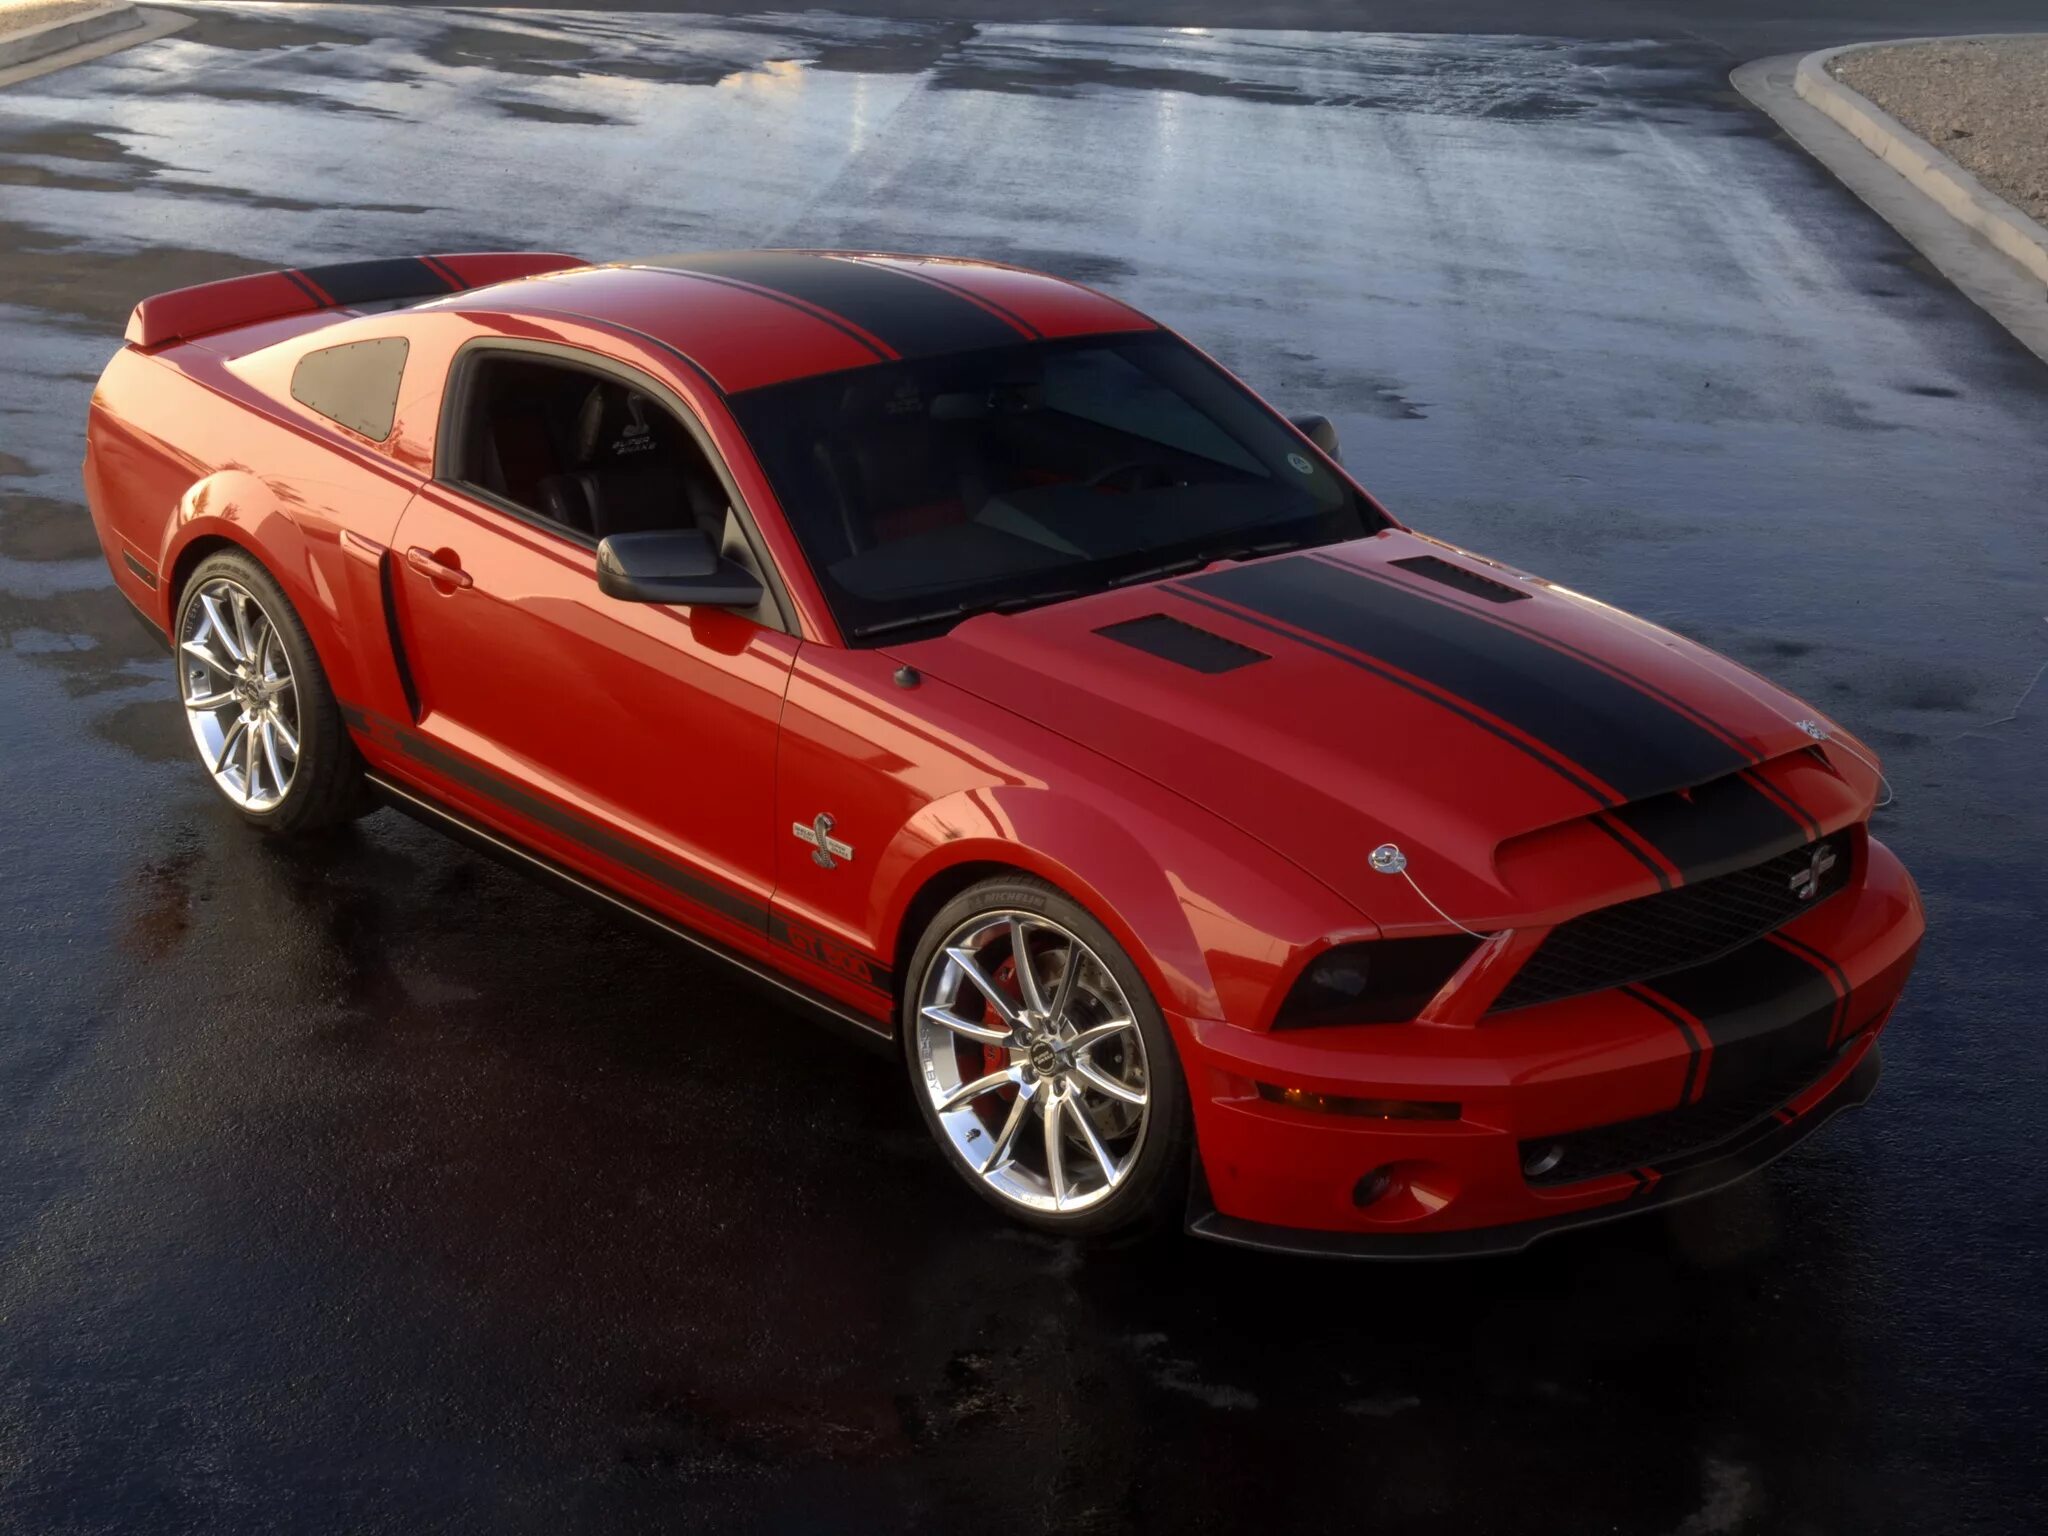 Mustang shelby gt 500. Форд Мустанг gt 500. Форд Мустанг gt 500 Shelby. Ford Shelby gt500. Ford Mustang gt500.